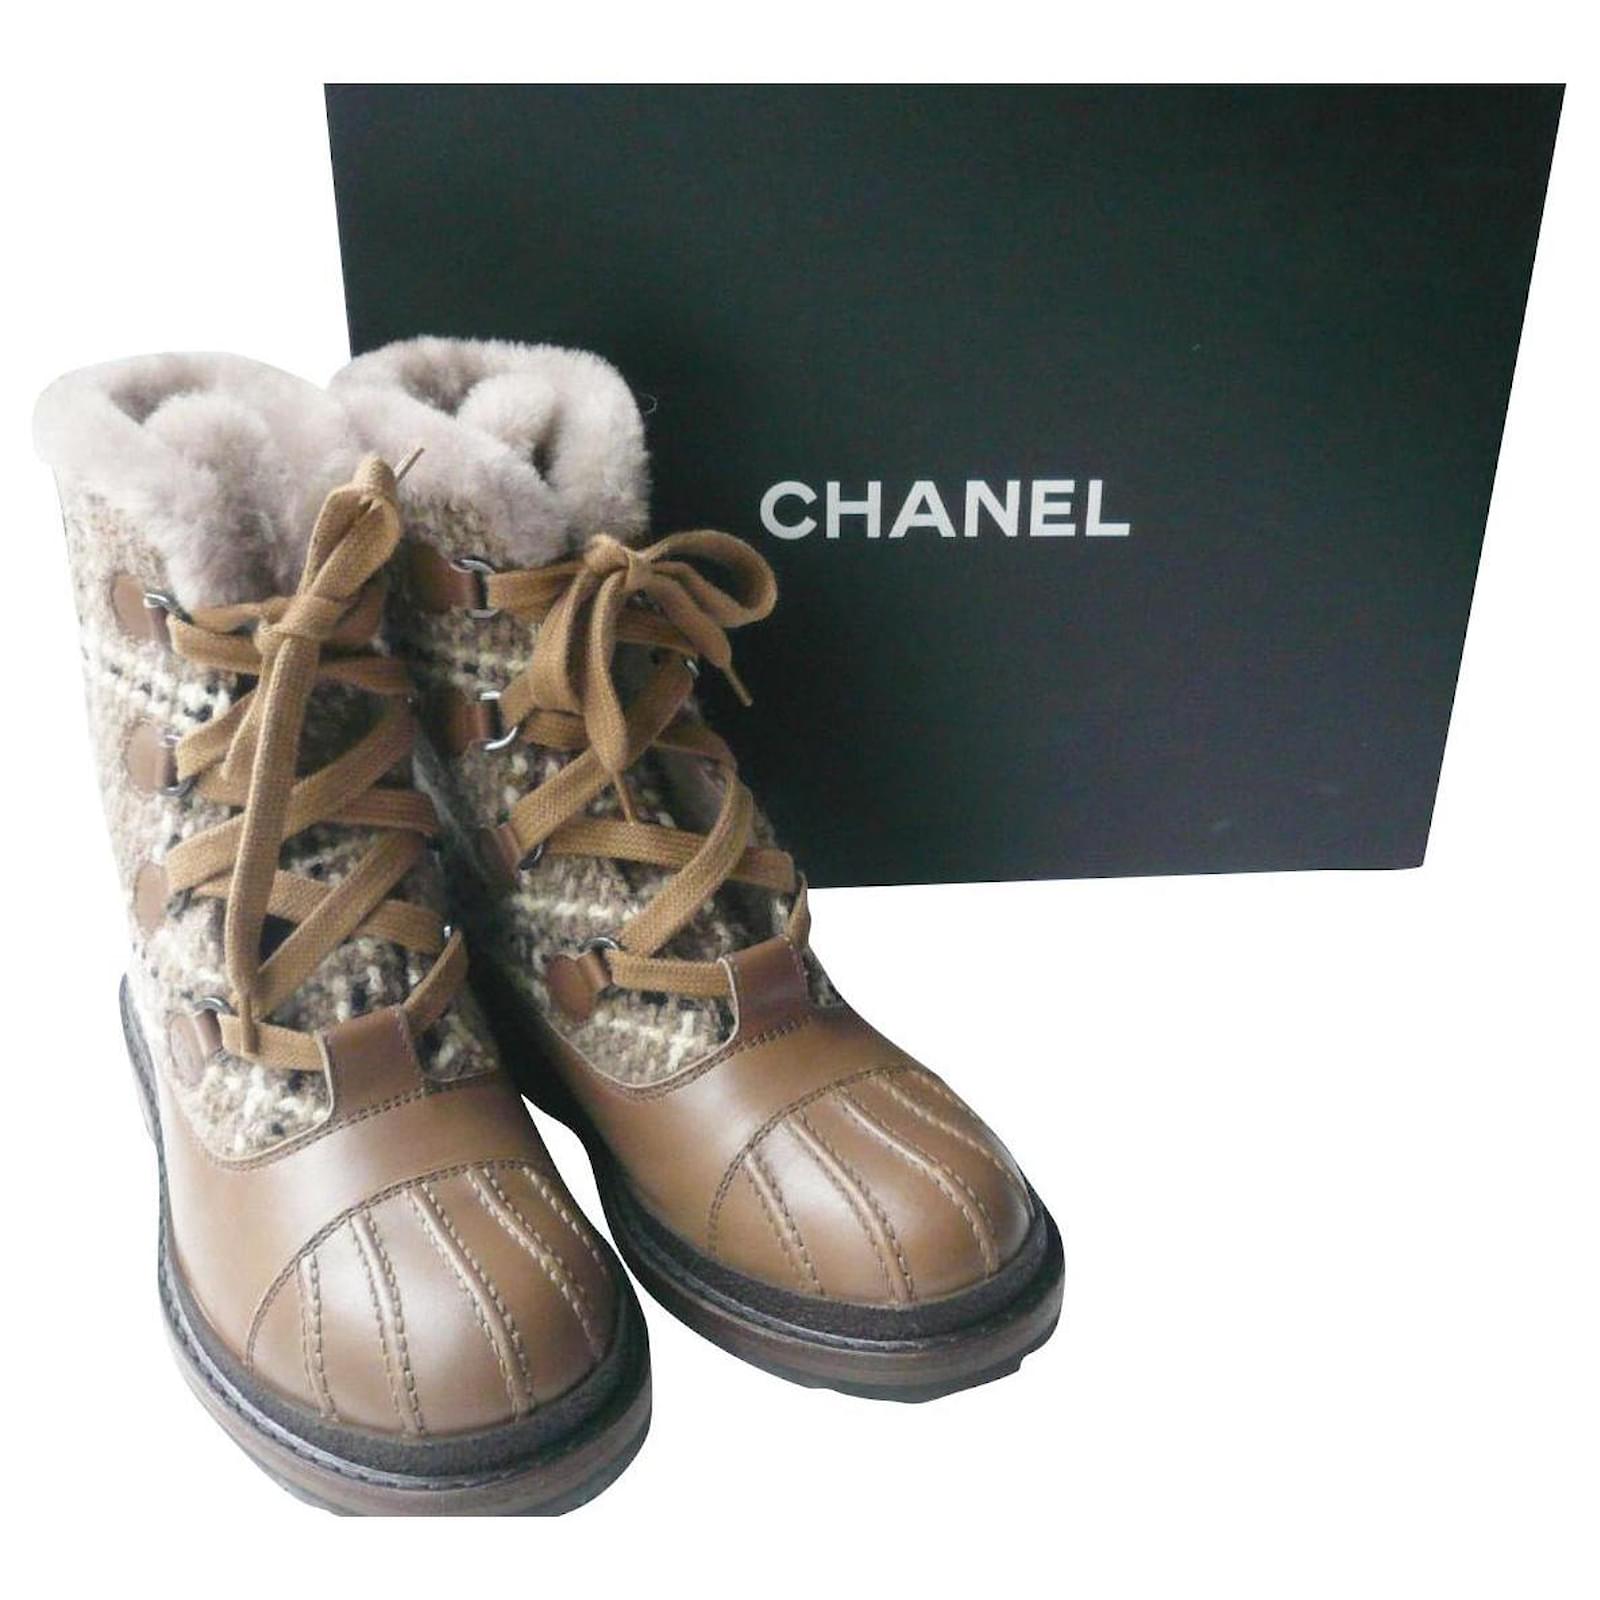 CHANEL Boots Lined with leather and café au lait tweed NEAR NEW CONDITION